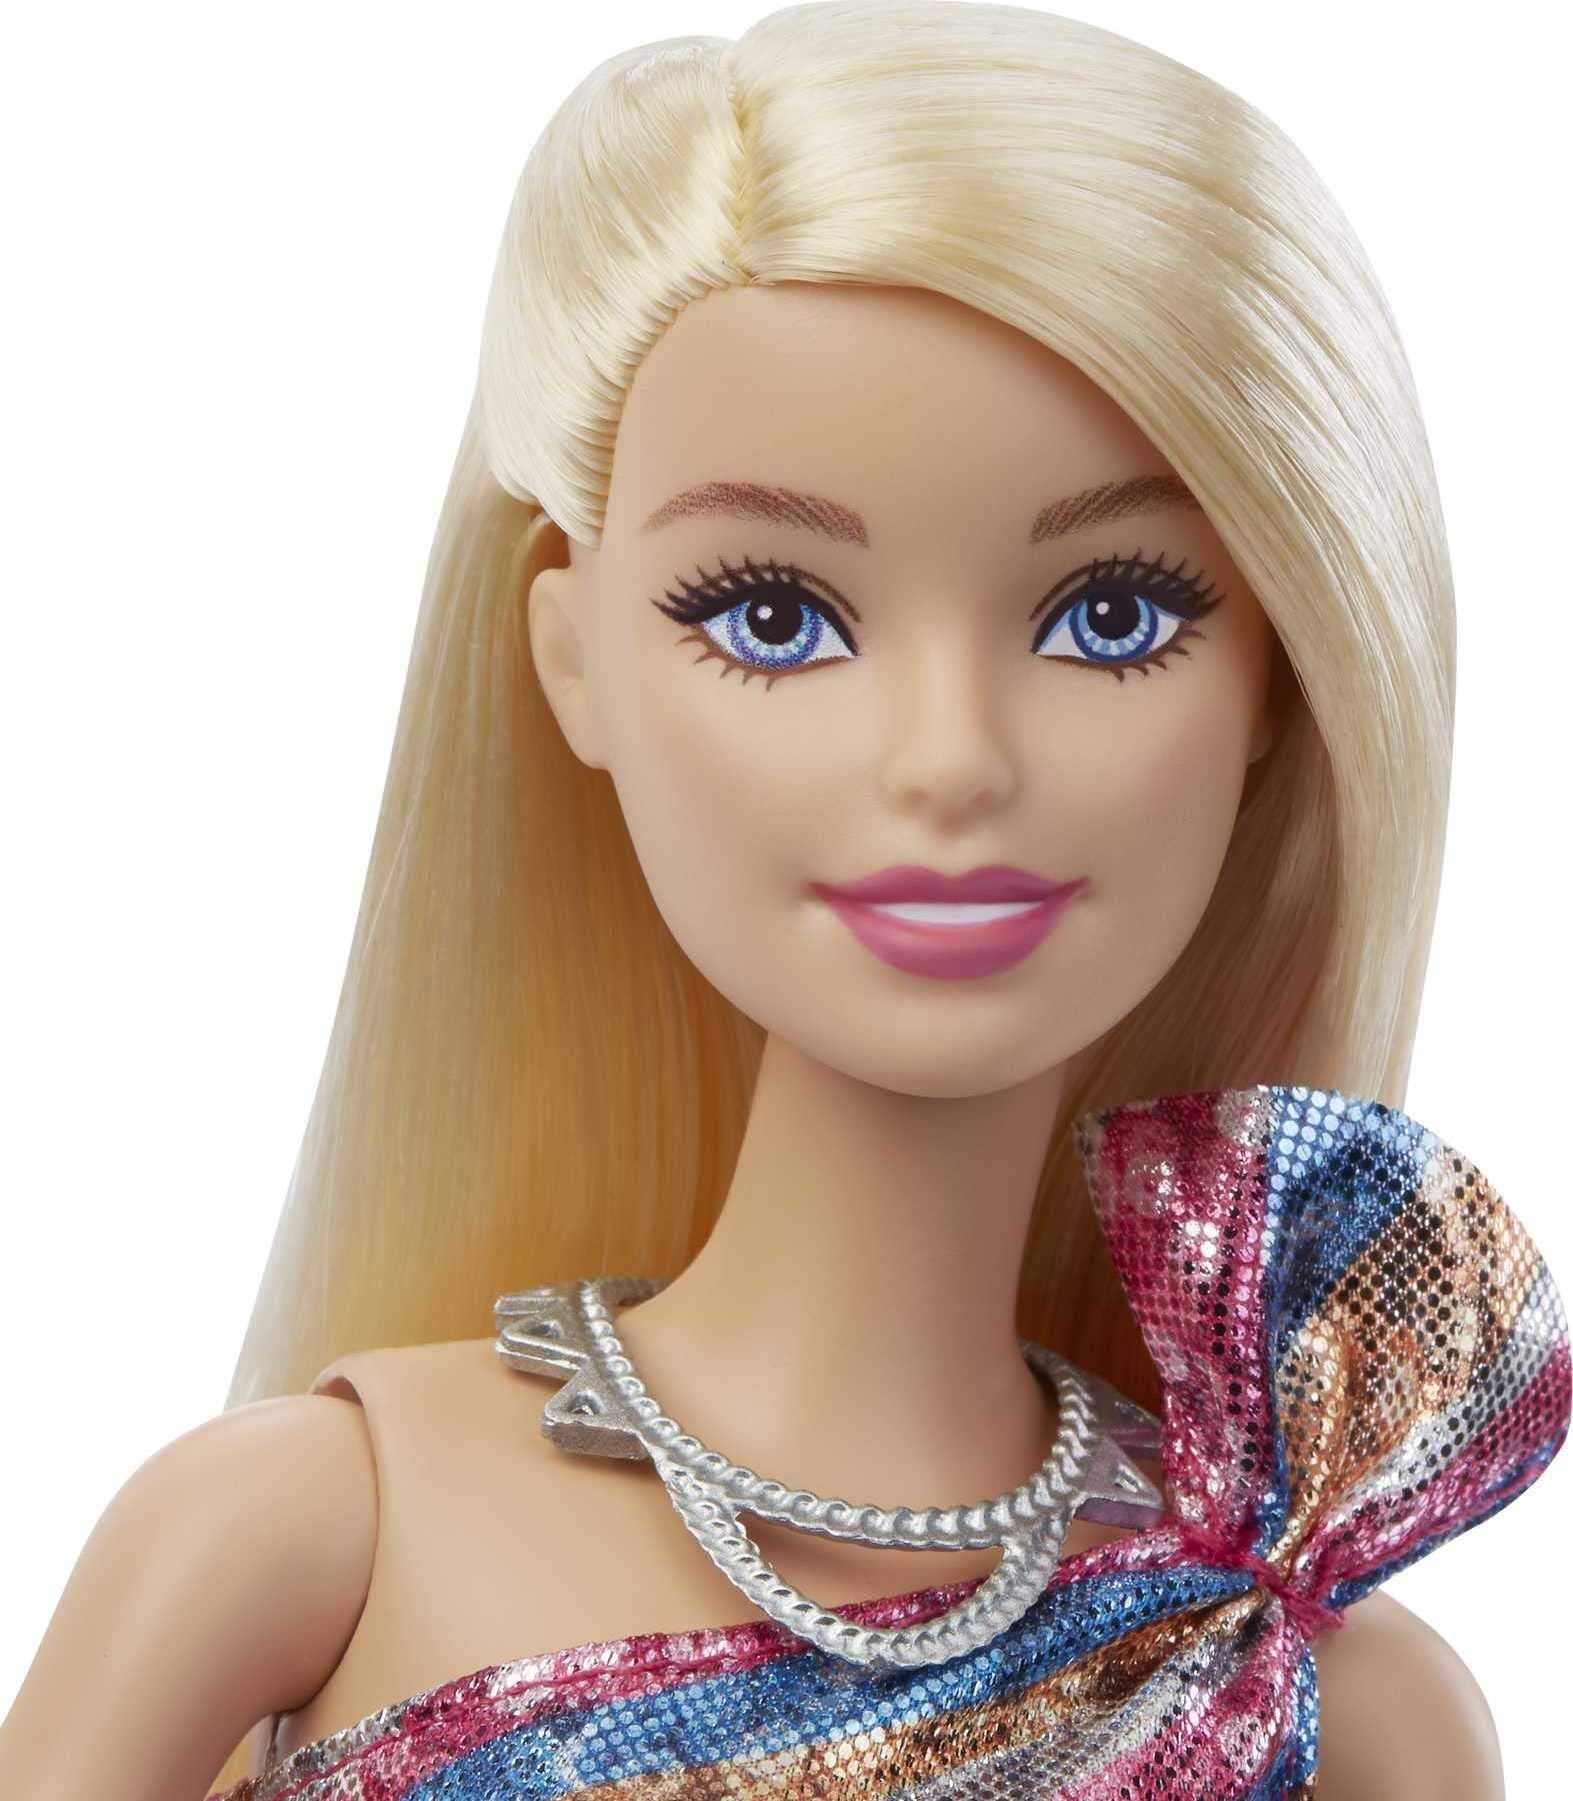 Barbie: Big City, Big Dreams Singing Barbie “Malibu” Roberts Doll (11.5-in Blonde) with Music, Light-Up Feature, Microphone & Accessories, Gift for 3 to 7 Year Olds